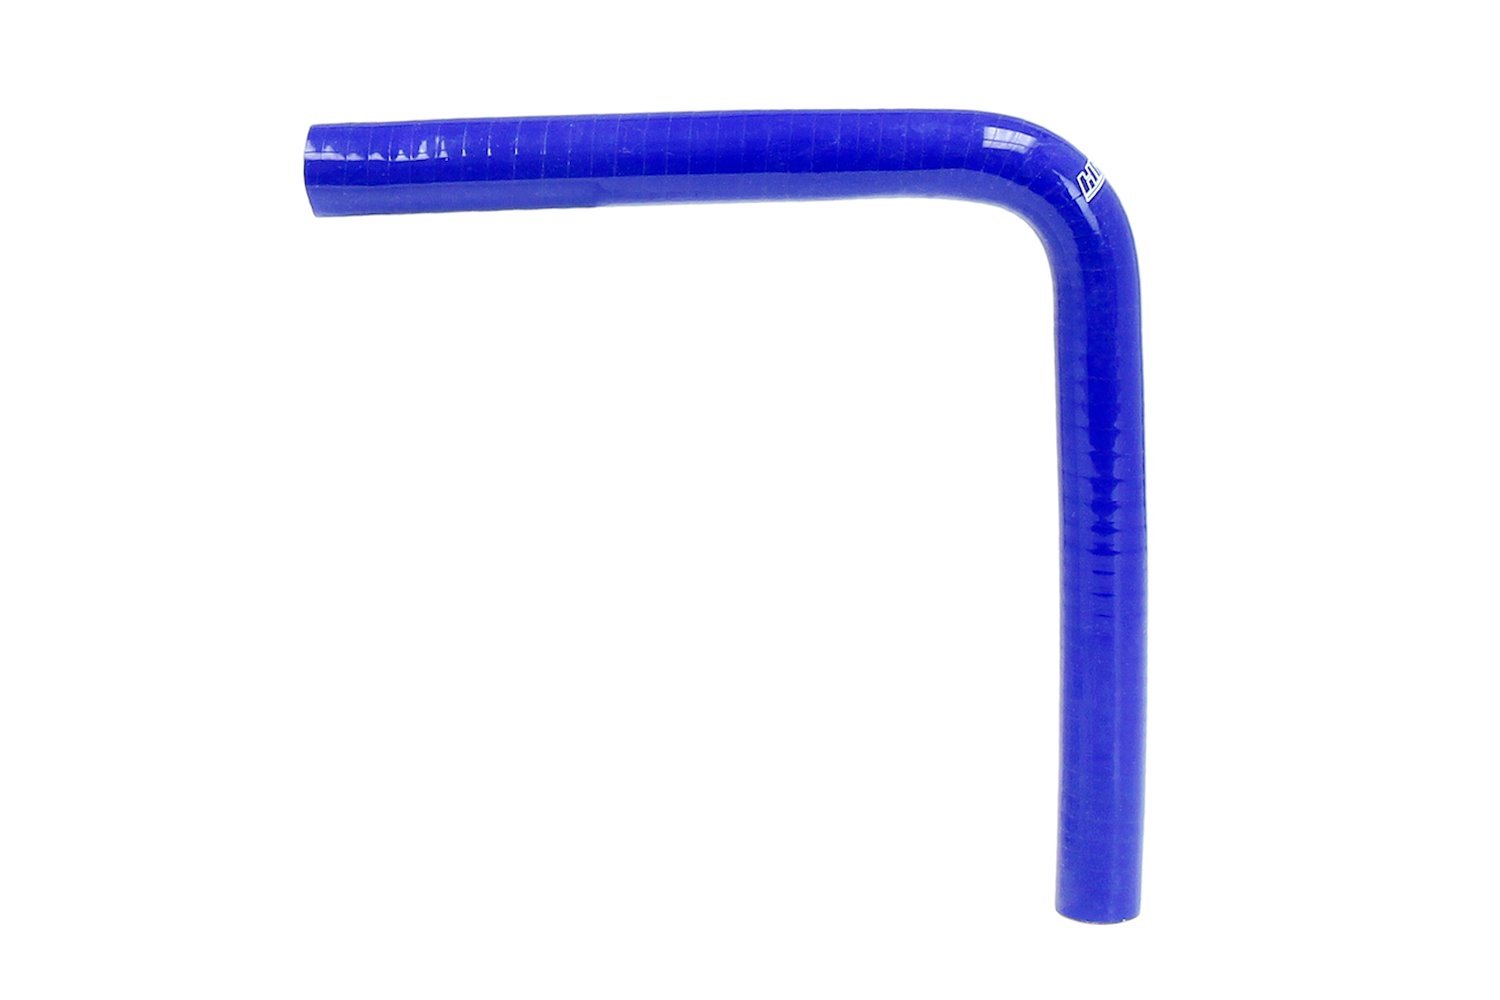 HTSEC90-062-L10-BLUE Silicone 90-Degree Elbow Hose, High-Temp 4-Ply Reinforced, 5/8 in. ID, 10 in. Leg, Blue